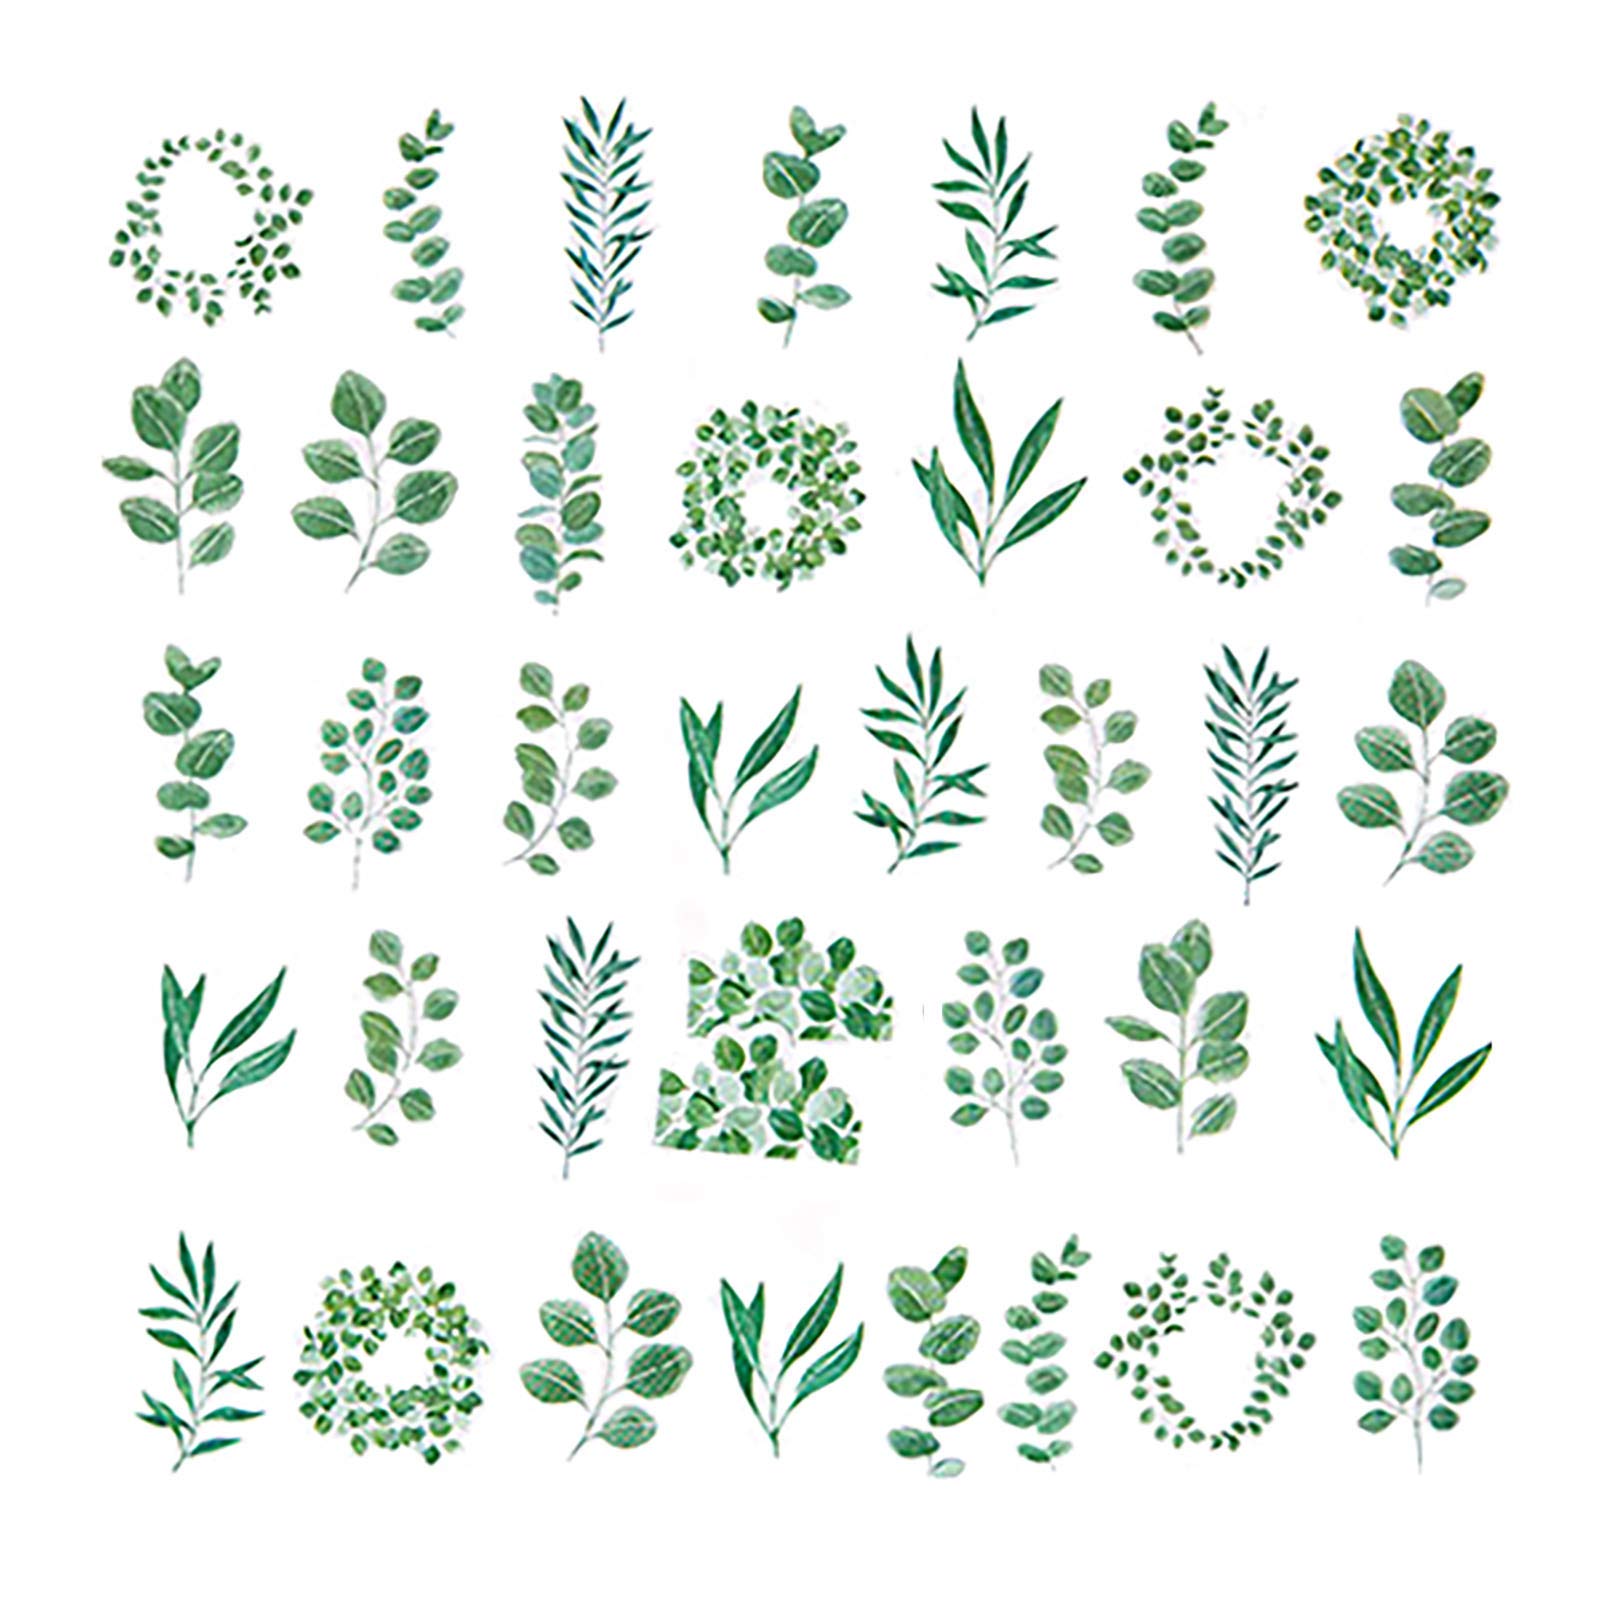 Doraking 45PCS Boxed DIY Decoration Green Leaves Adhesive Paper Stickers for Laptop Planners Scrapbook Diary Notebooks (Green)